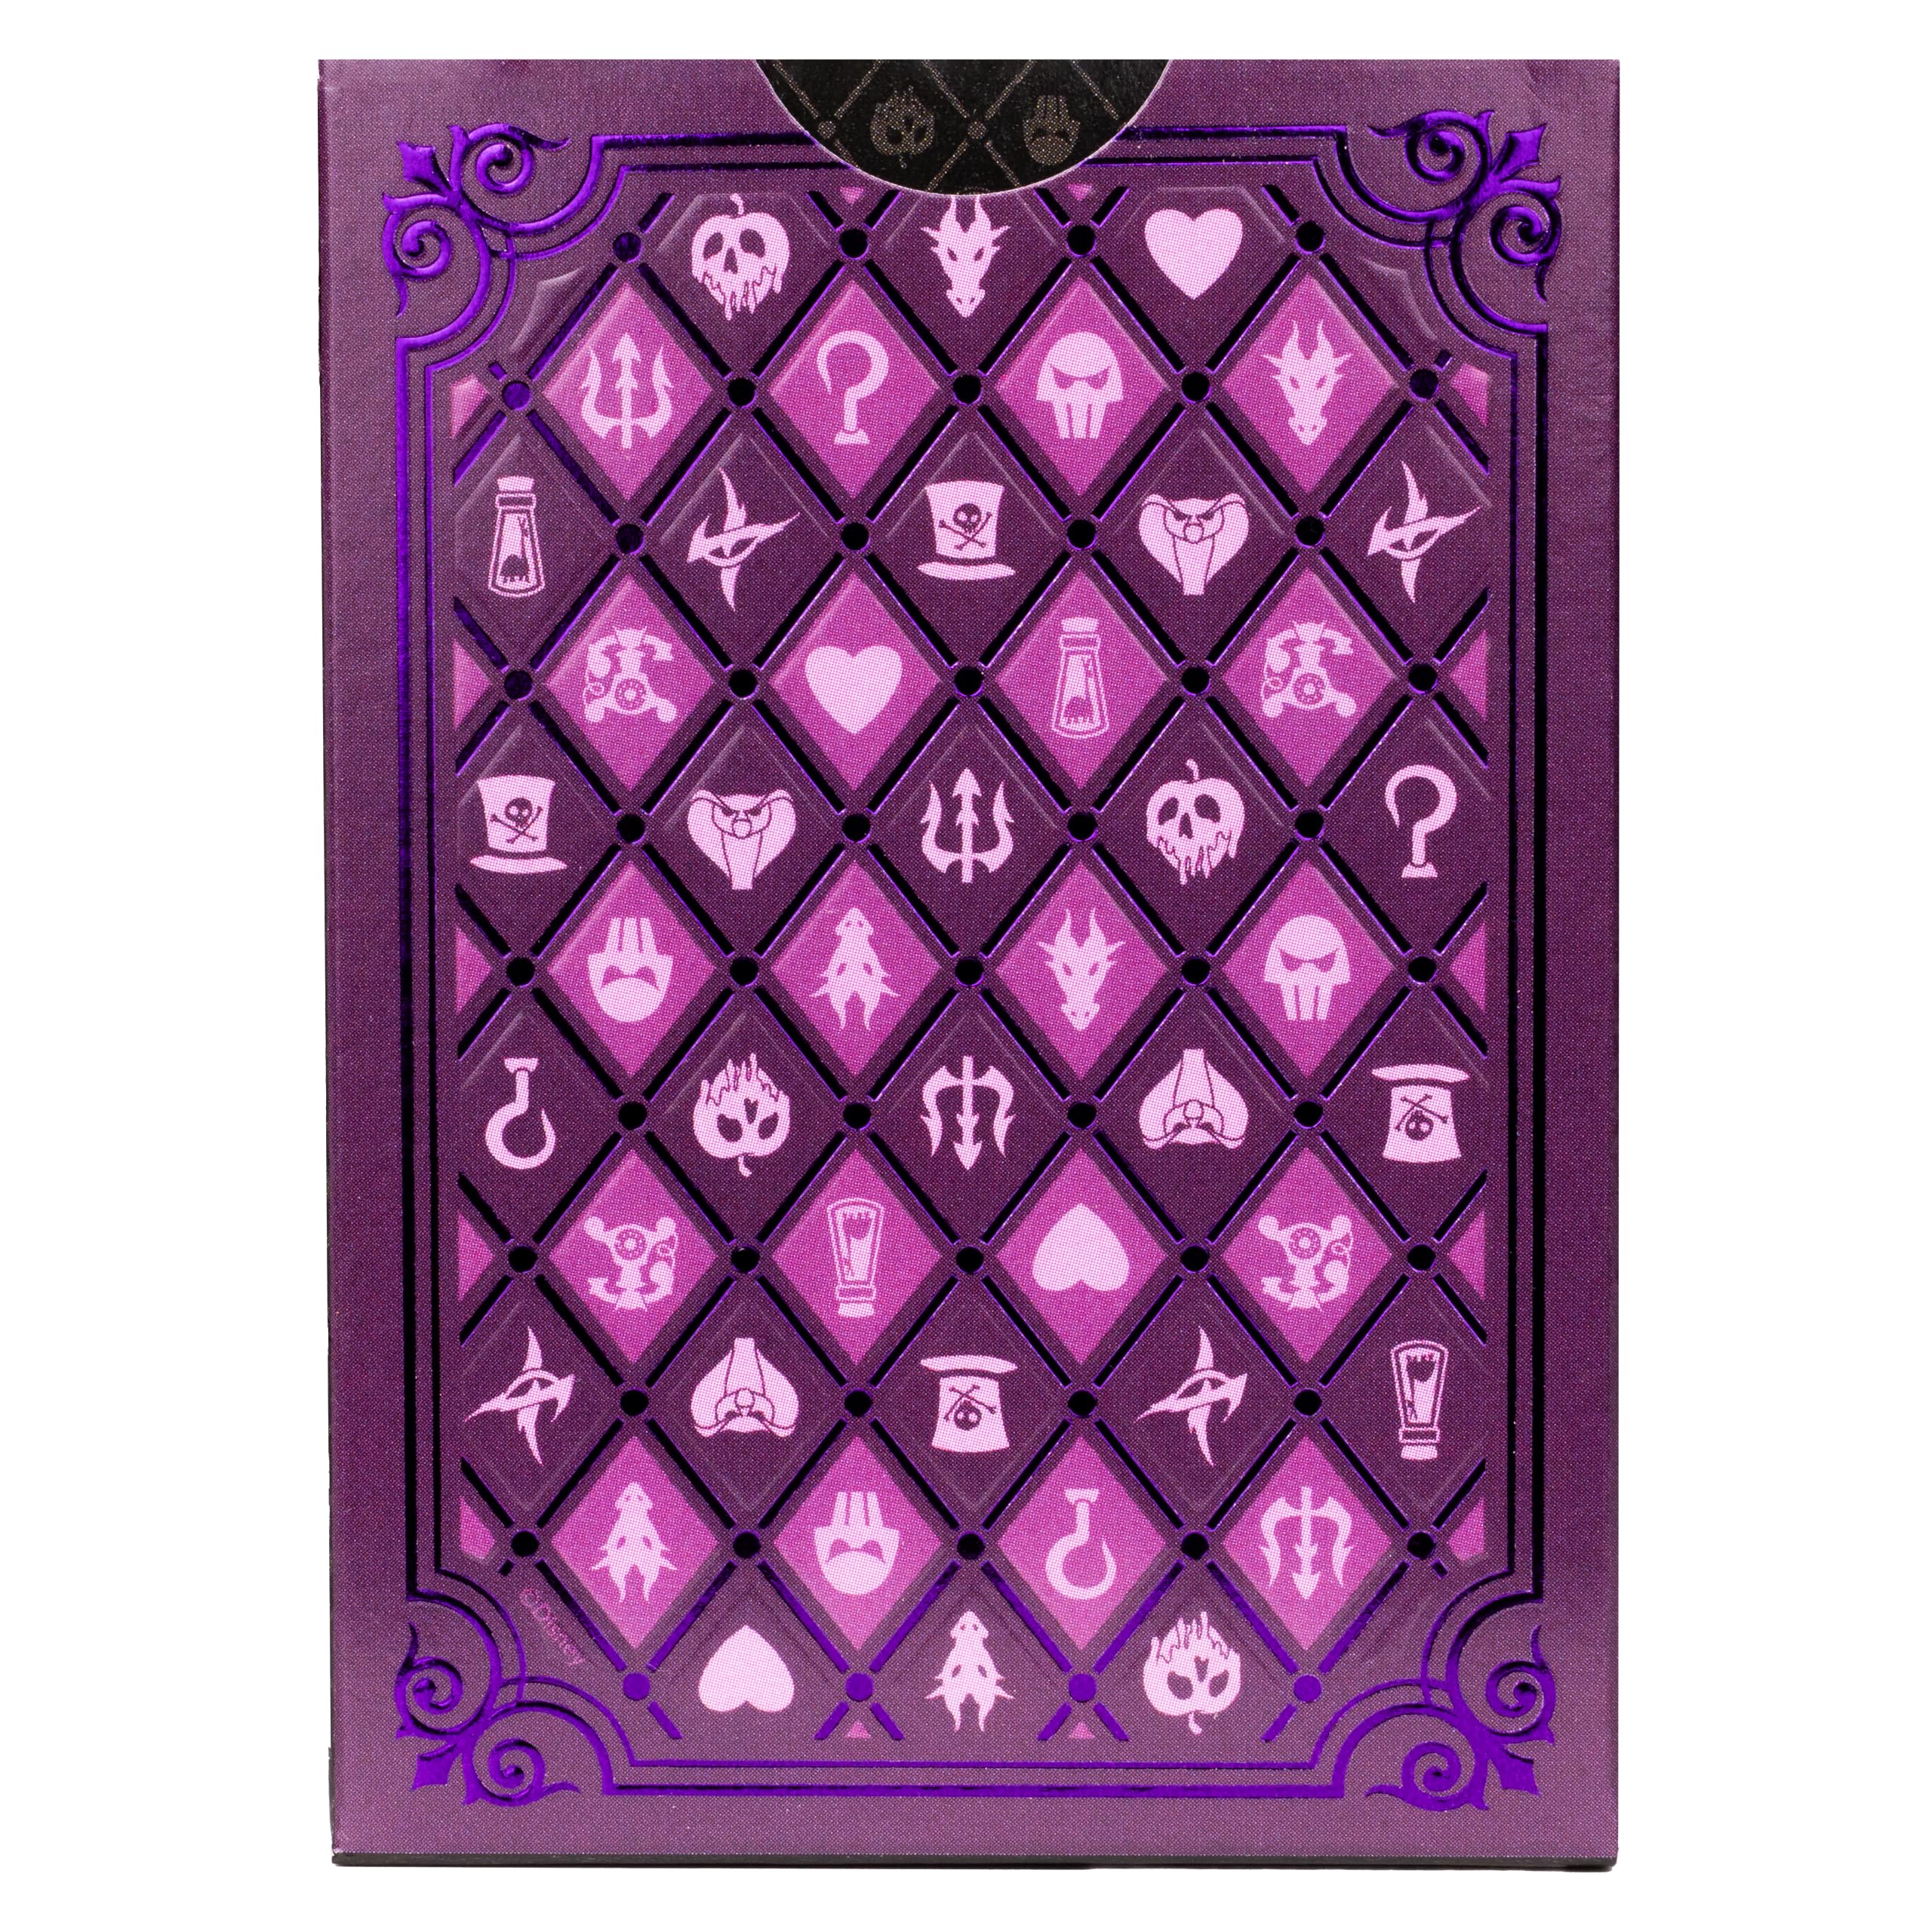 Bicycle Disney Villains Playing Cards - Features 12 Disney Villains Including Scar, Maleficent, Ursula, and More - Green or Purple Playing Cards (Colors May Vary)